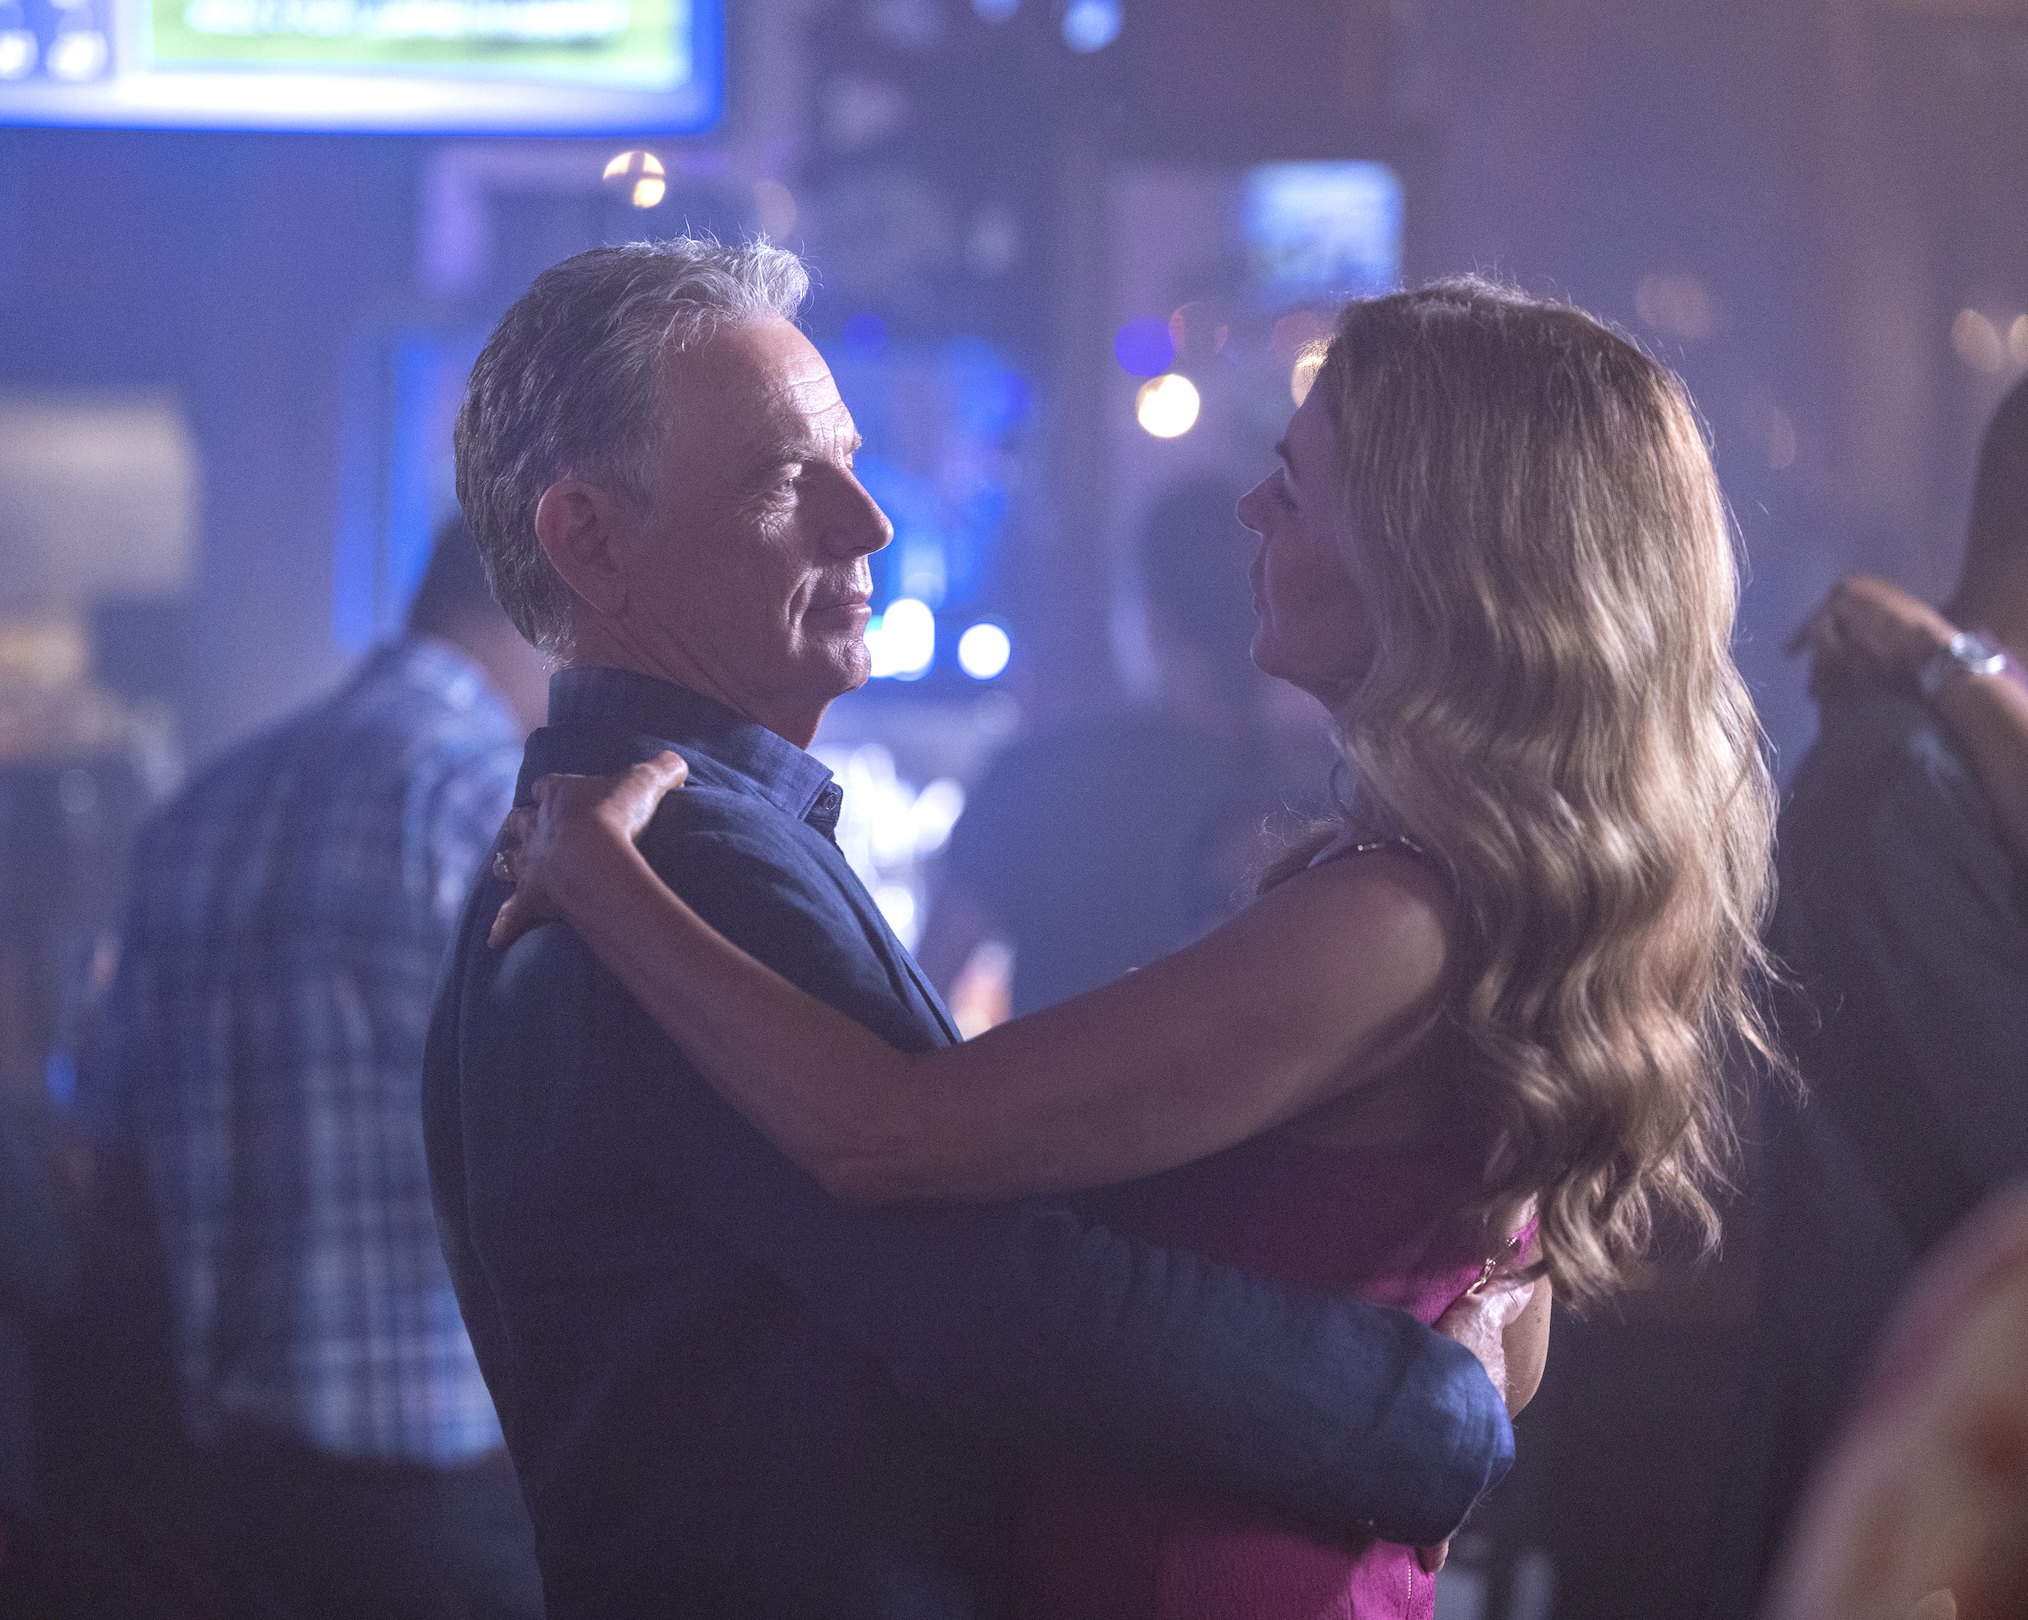 Bruce Greenwood as Bell and Jane Leeves as Kit dancing in The Resident